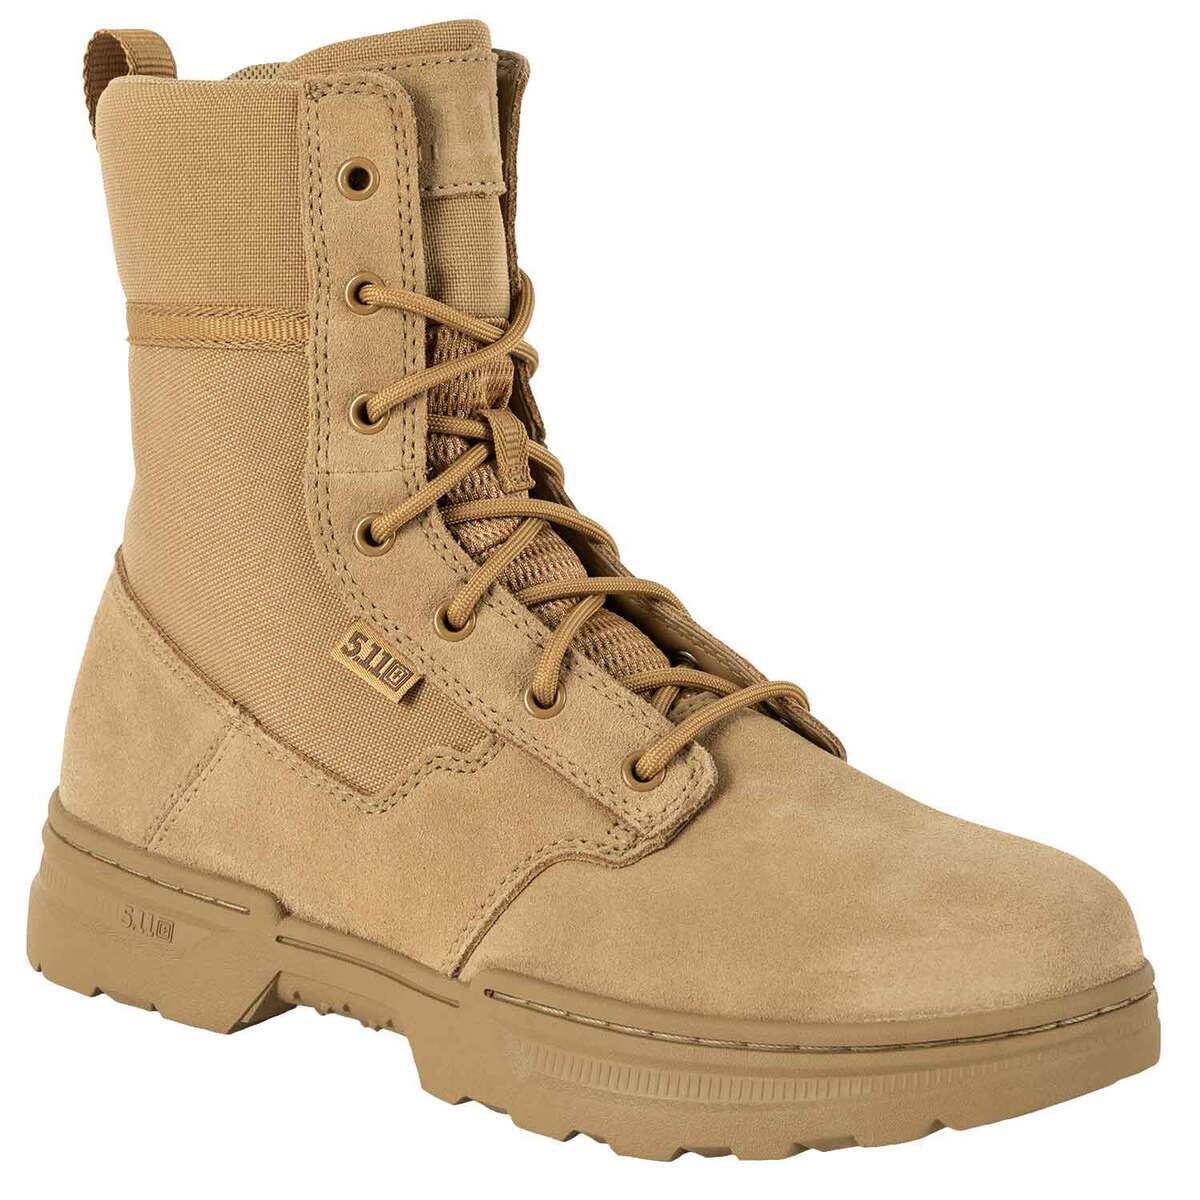 5.11® A/T 8 Side Zip Boot